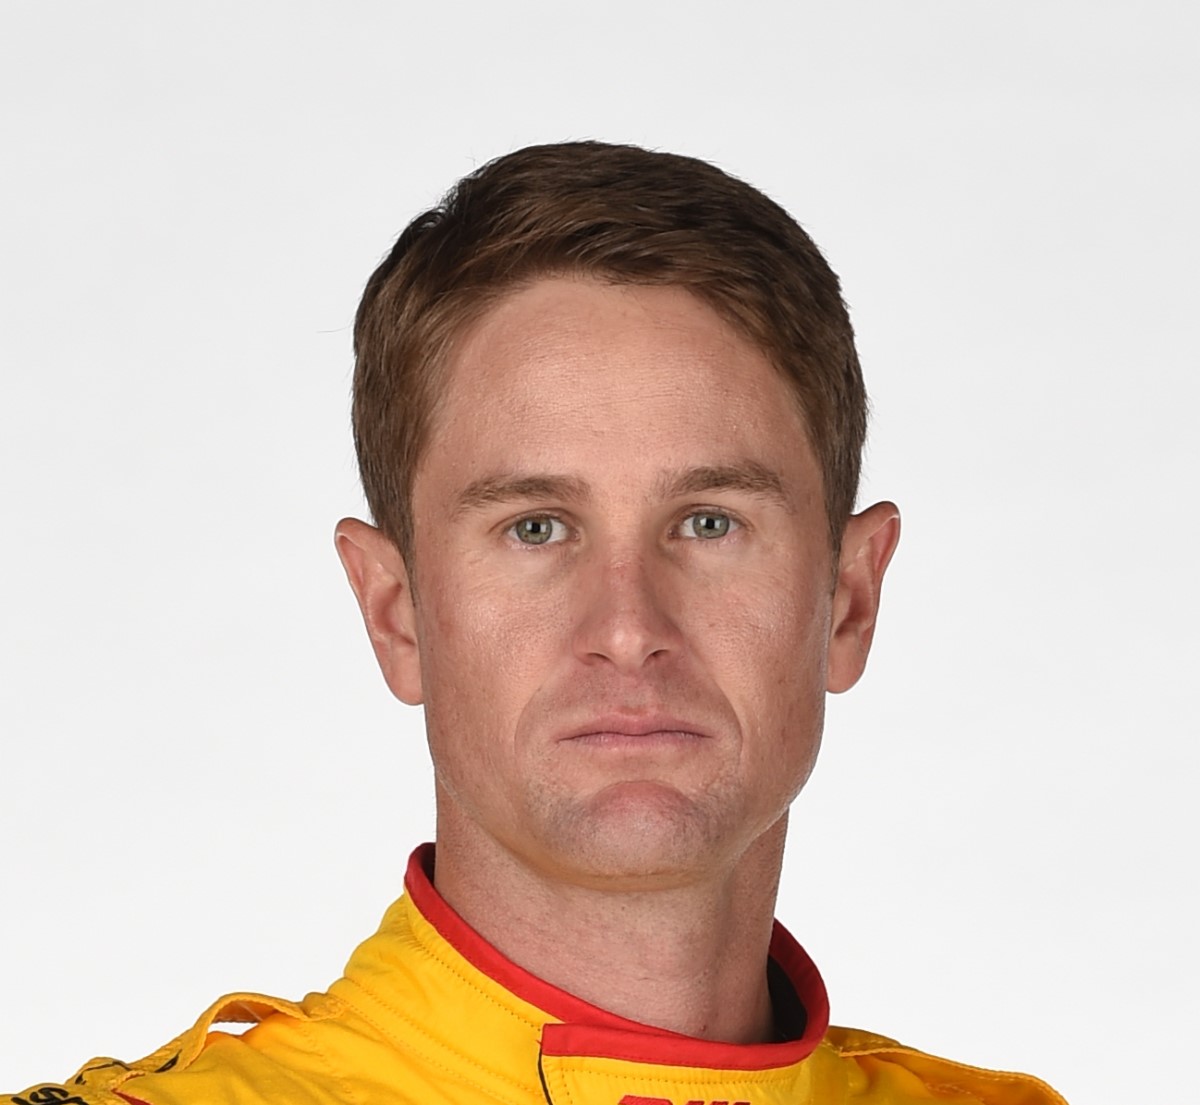 Hunter-Reay has had to chase one shell company after another to collect the damages owed him.